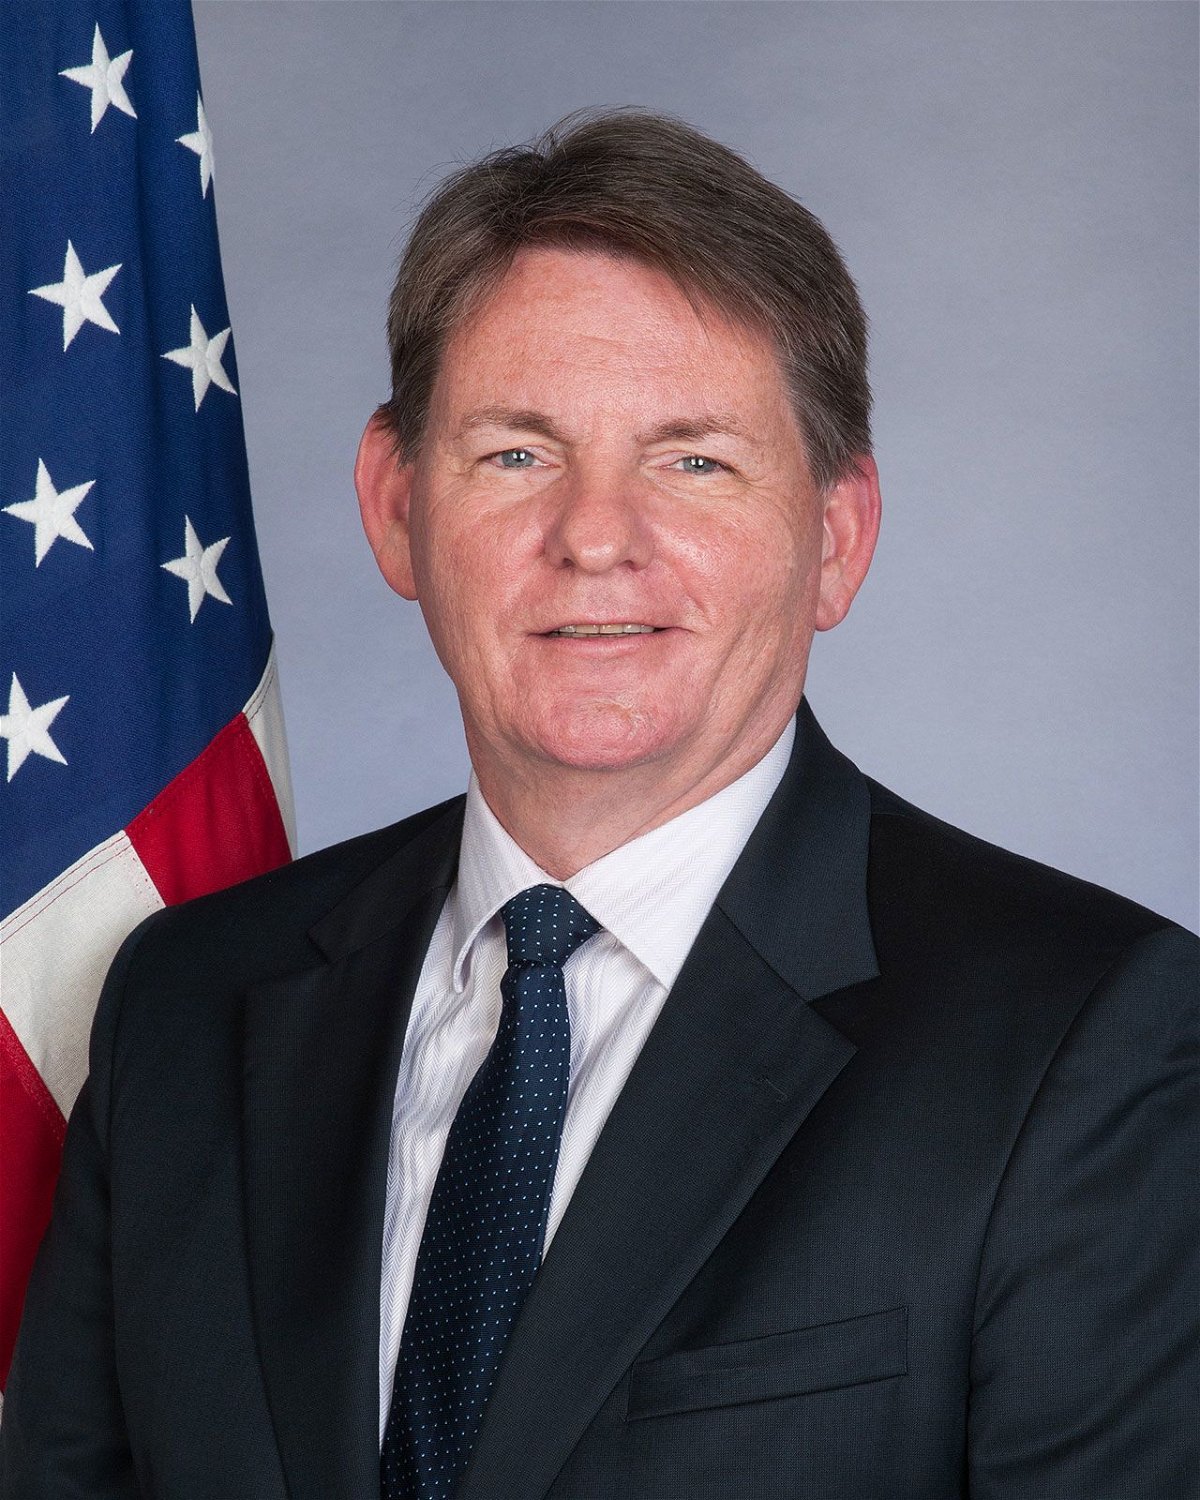 <i>US Department of State via CNN Newsource</i><br/>The Senate confirmed career foreign service member Dennis Hankins to be US ambassador to Haiti